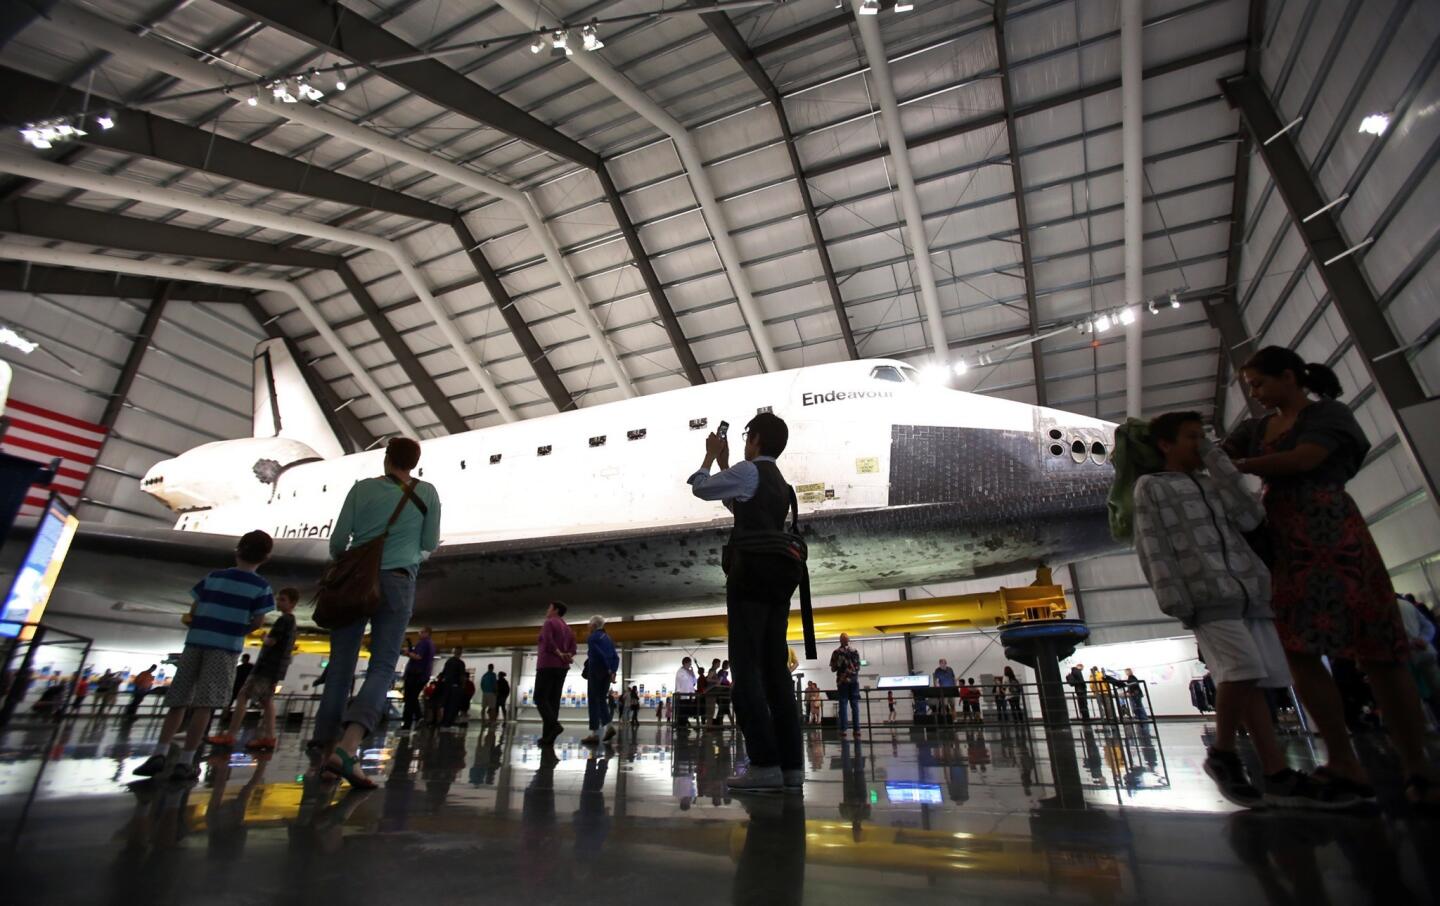 Visitors view the space shuttle Endeavour at the California Science Center. More than 1 million people have visited since Endeavour made its debut just over four months ago, far surpassing officials' expectations for the Exposition Park museum.